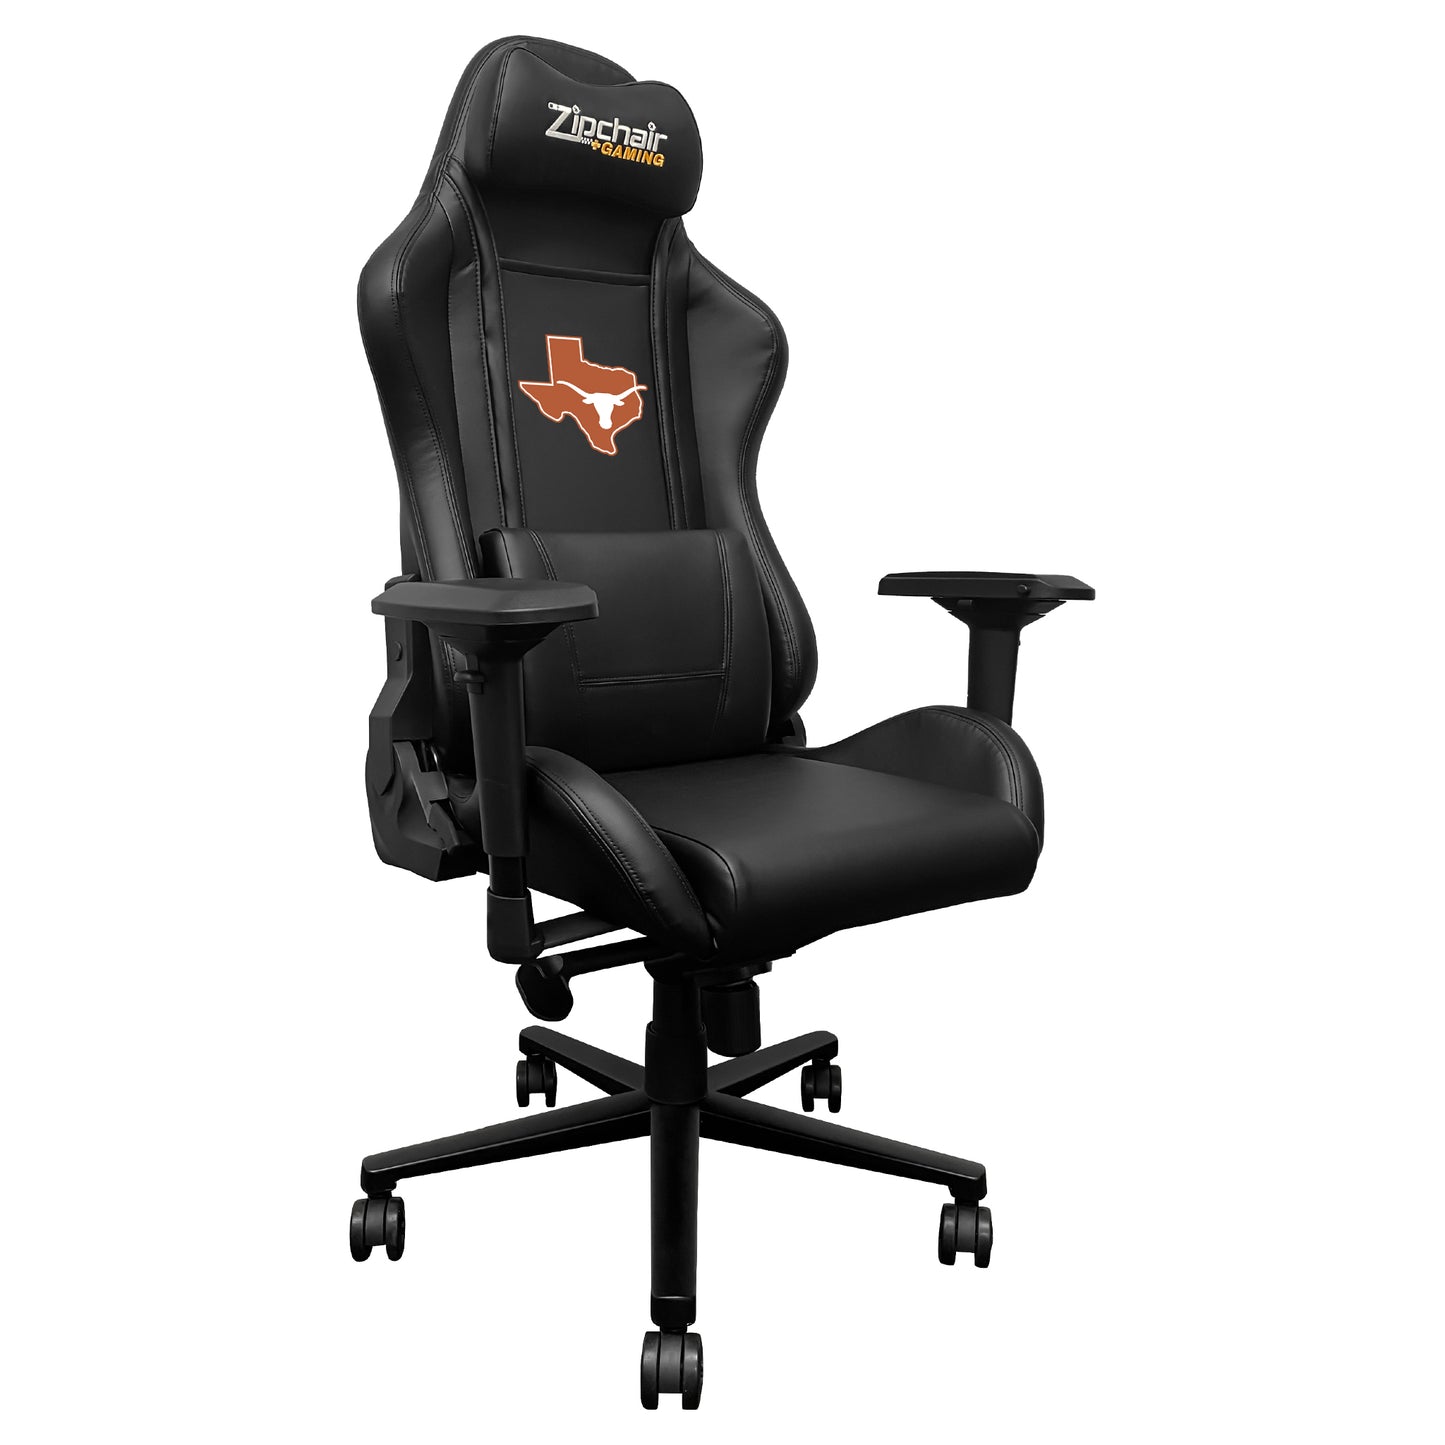 Xpression Pro Gaming Chair with Texas Longhorns Secondary